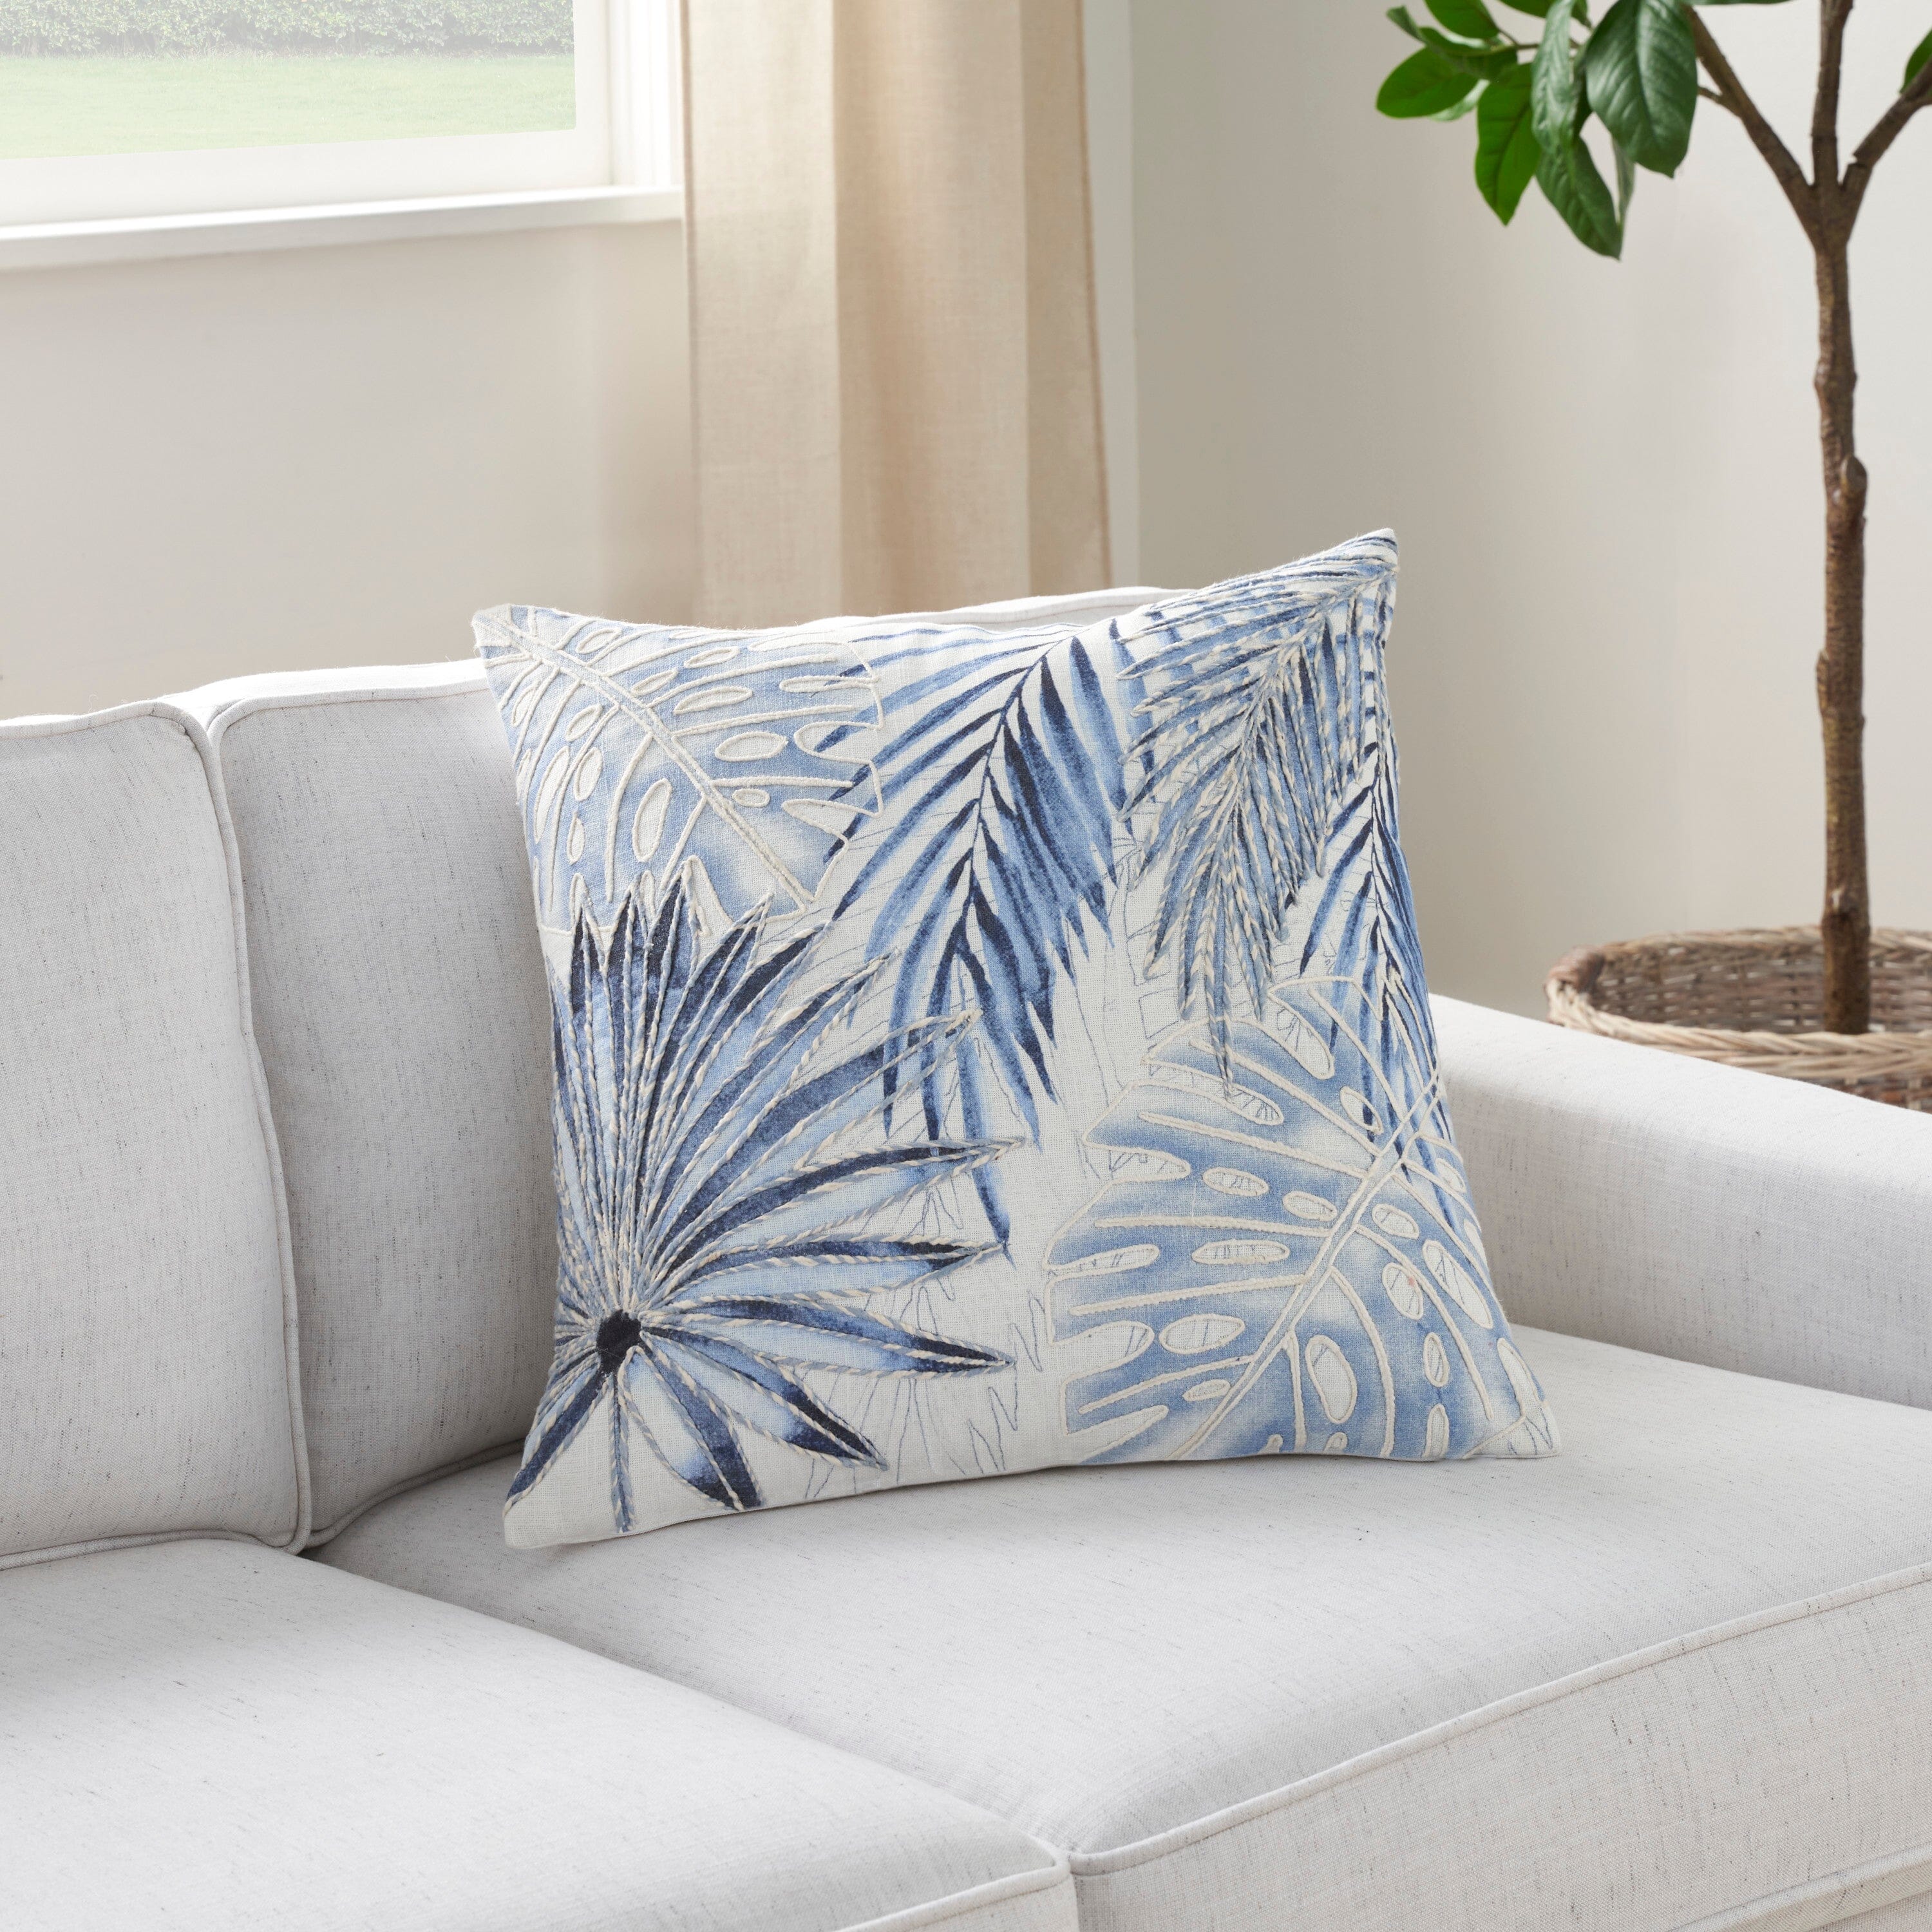 Mina Victory Cover Print/Embd Palms 18" x 18" Blue Indoor Pillow Covers Mina Victory